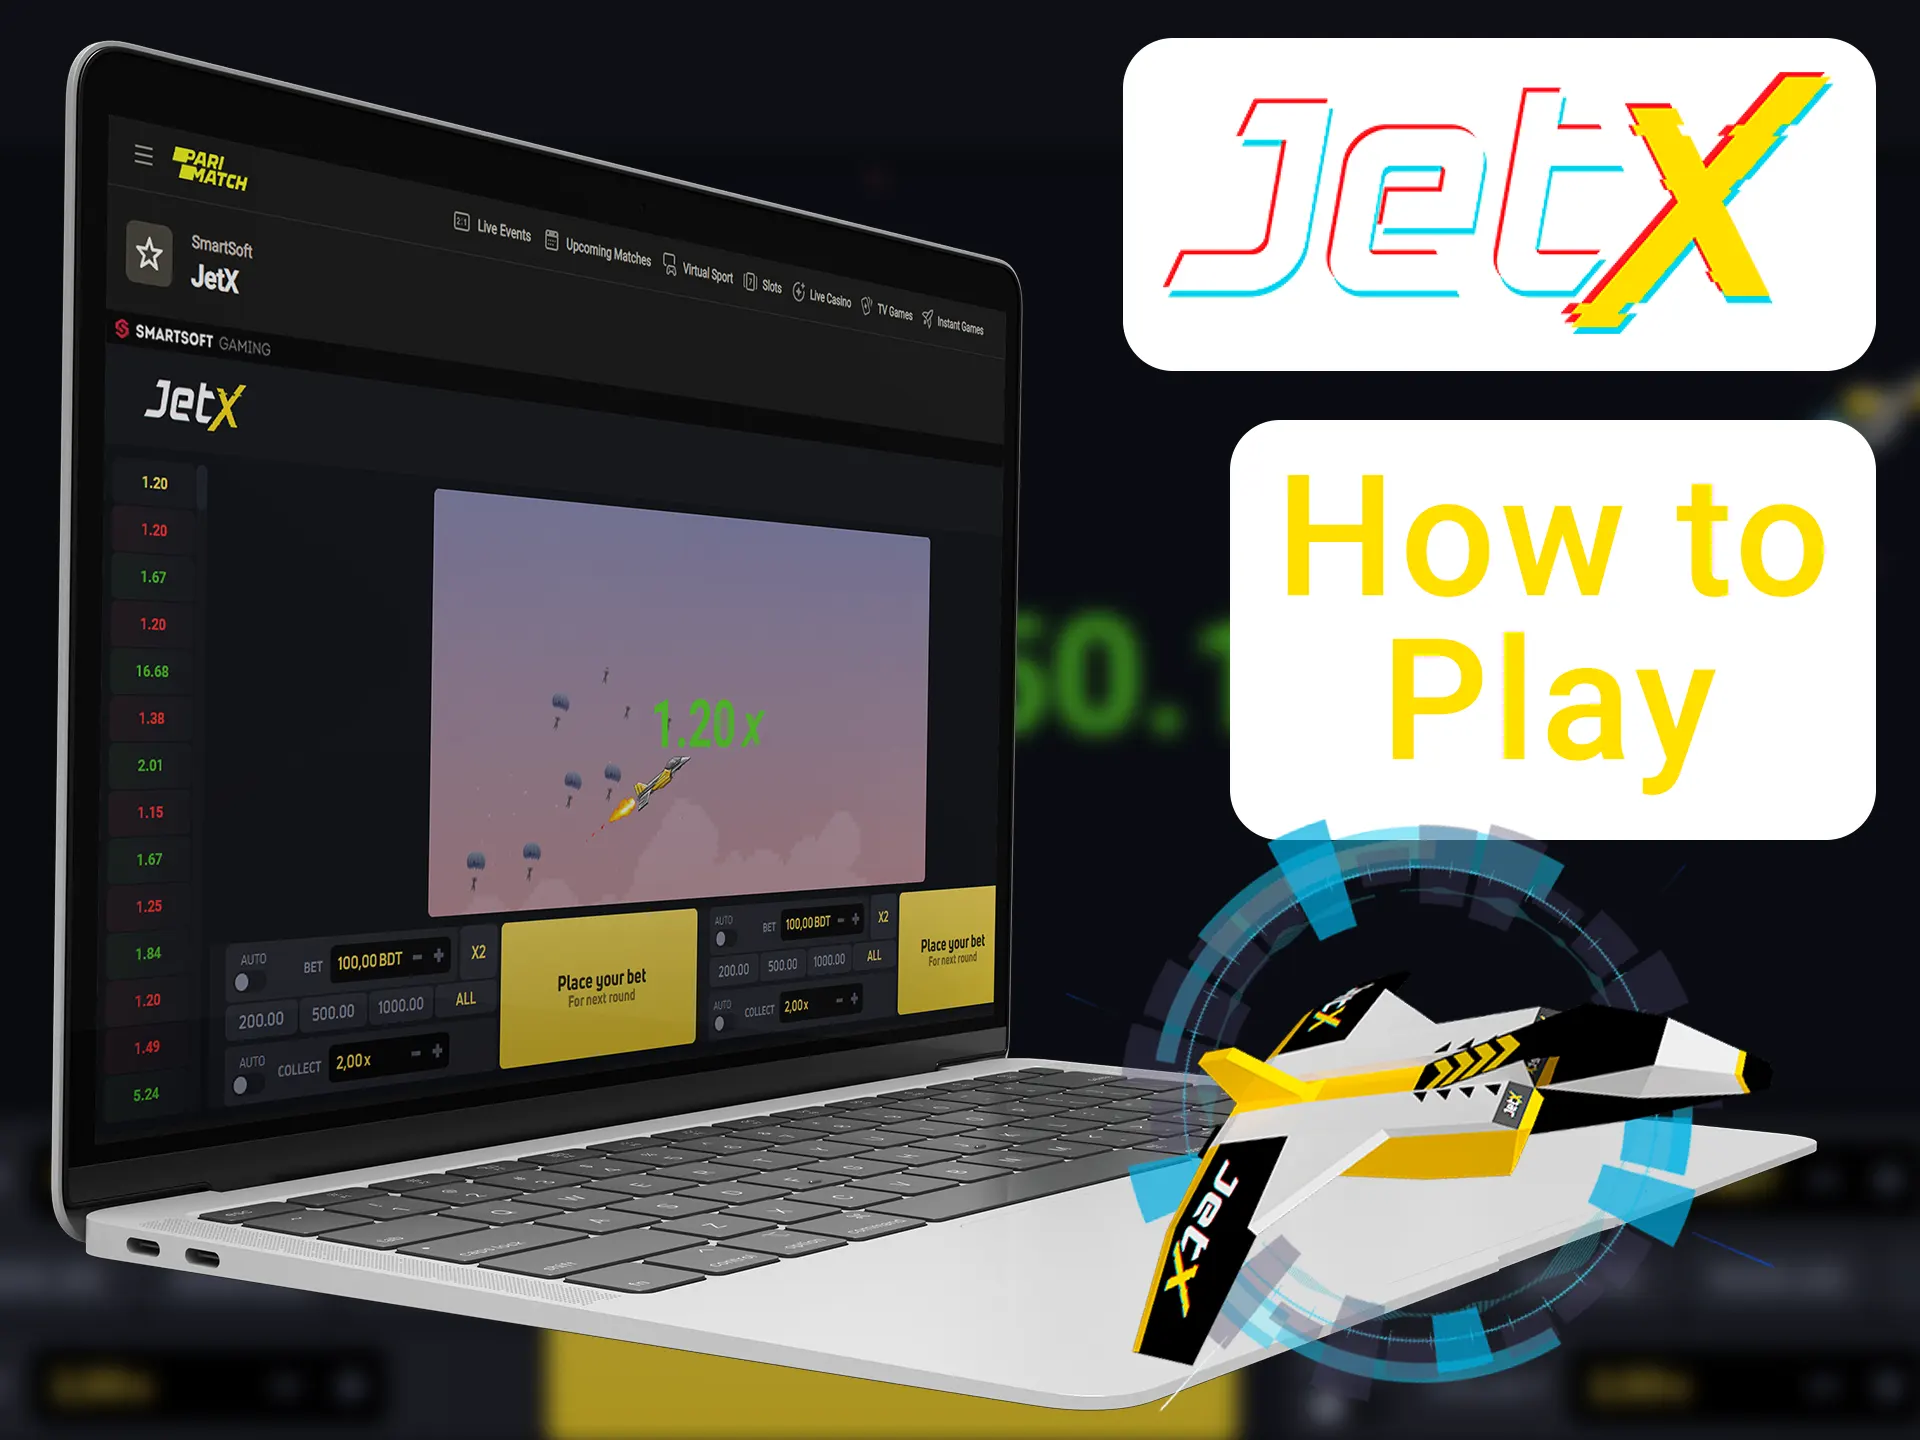 It's easy to play JetX game.